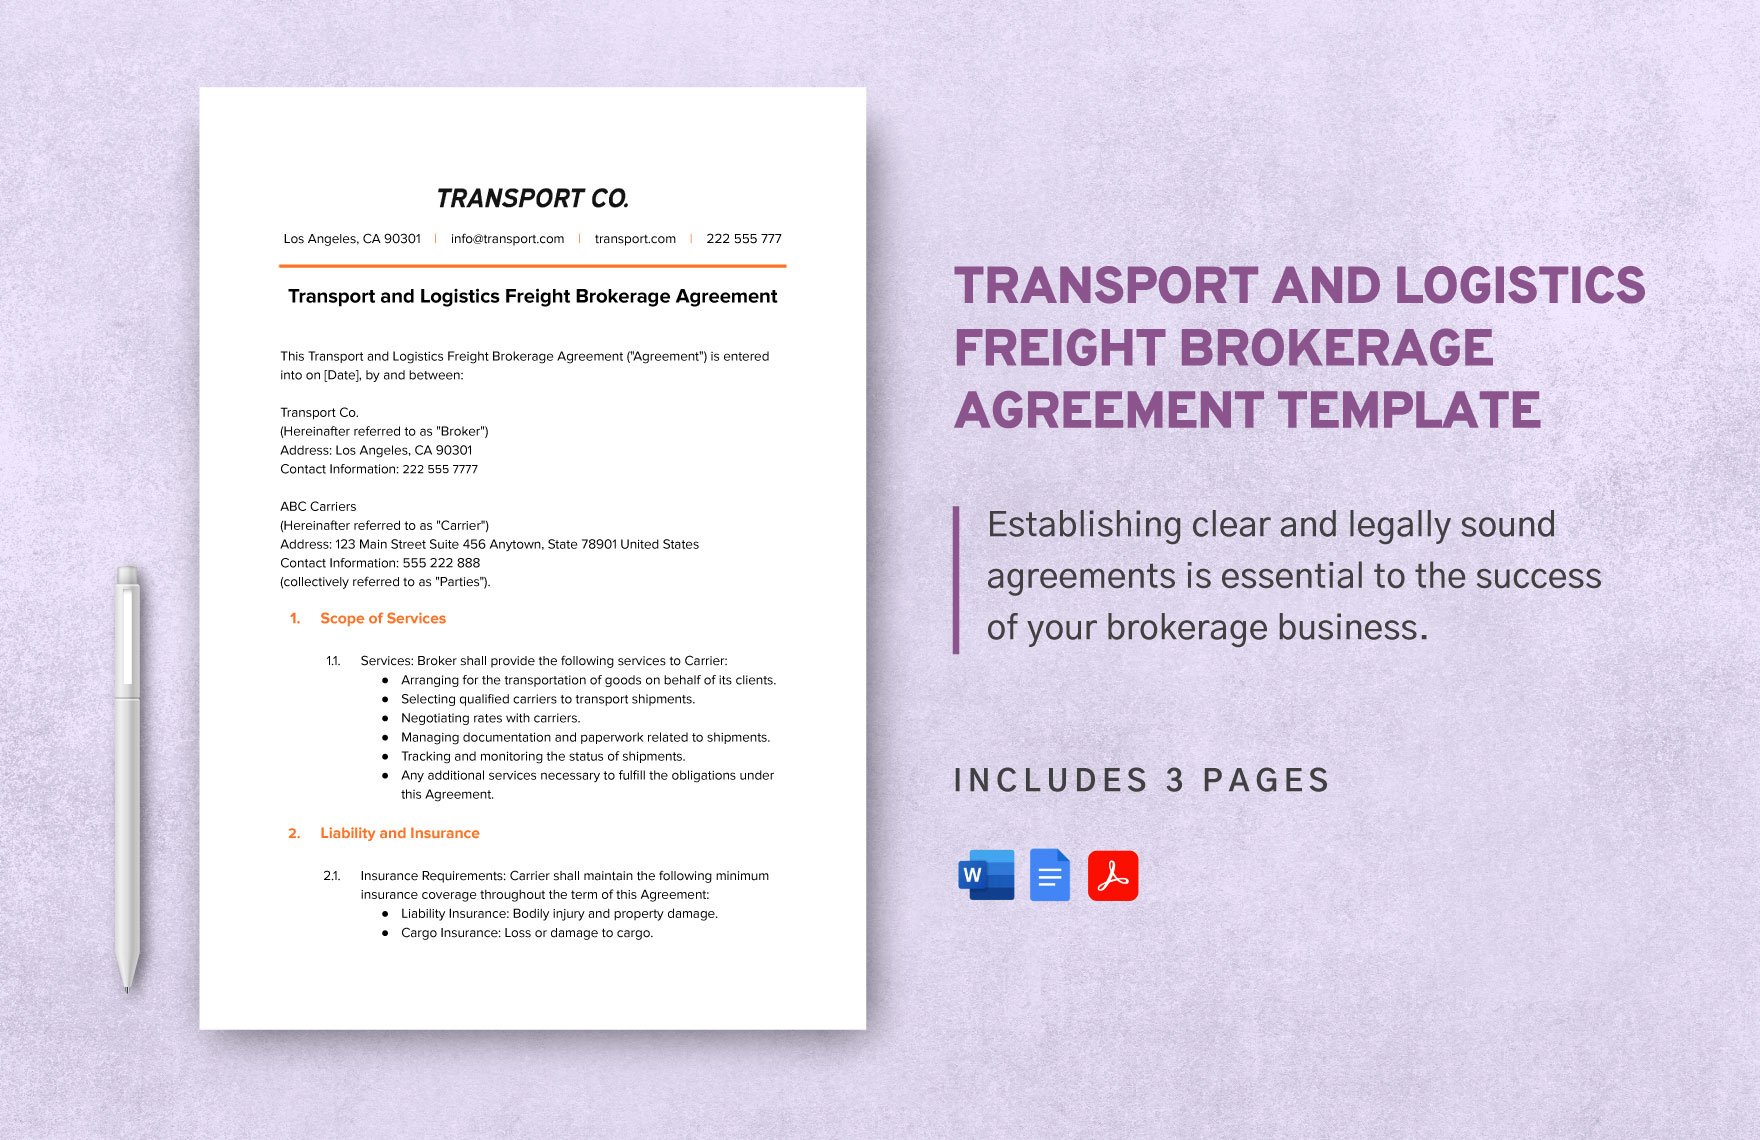 Transport and Logistics Freight Brokerage Agreement Template